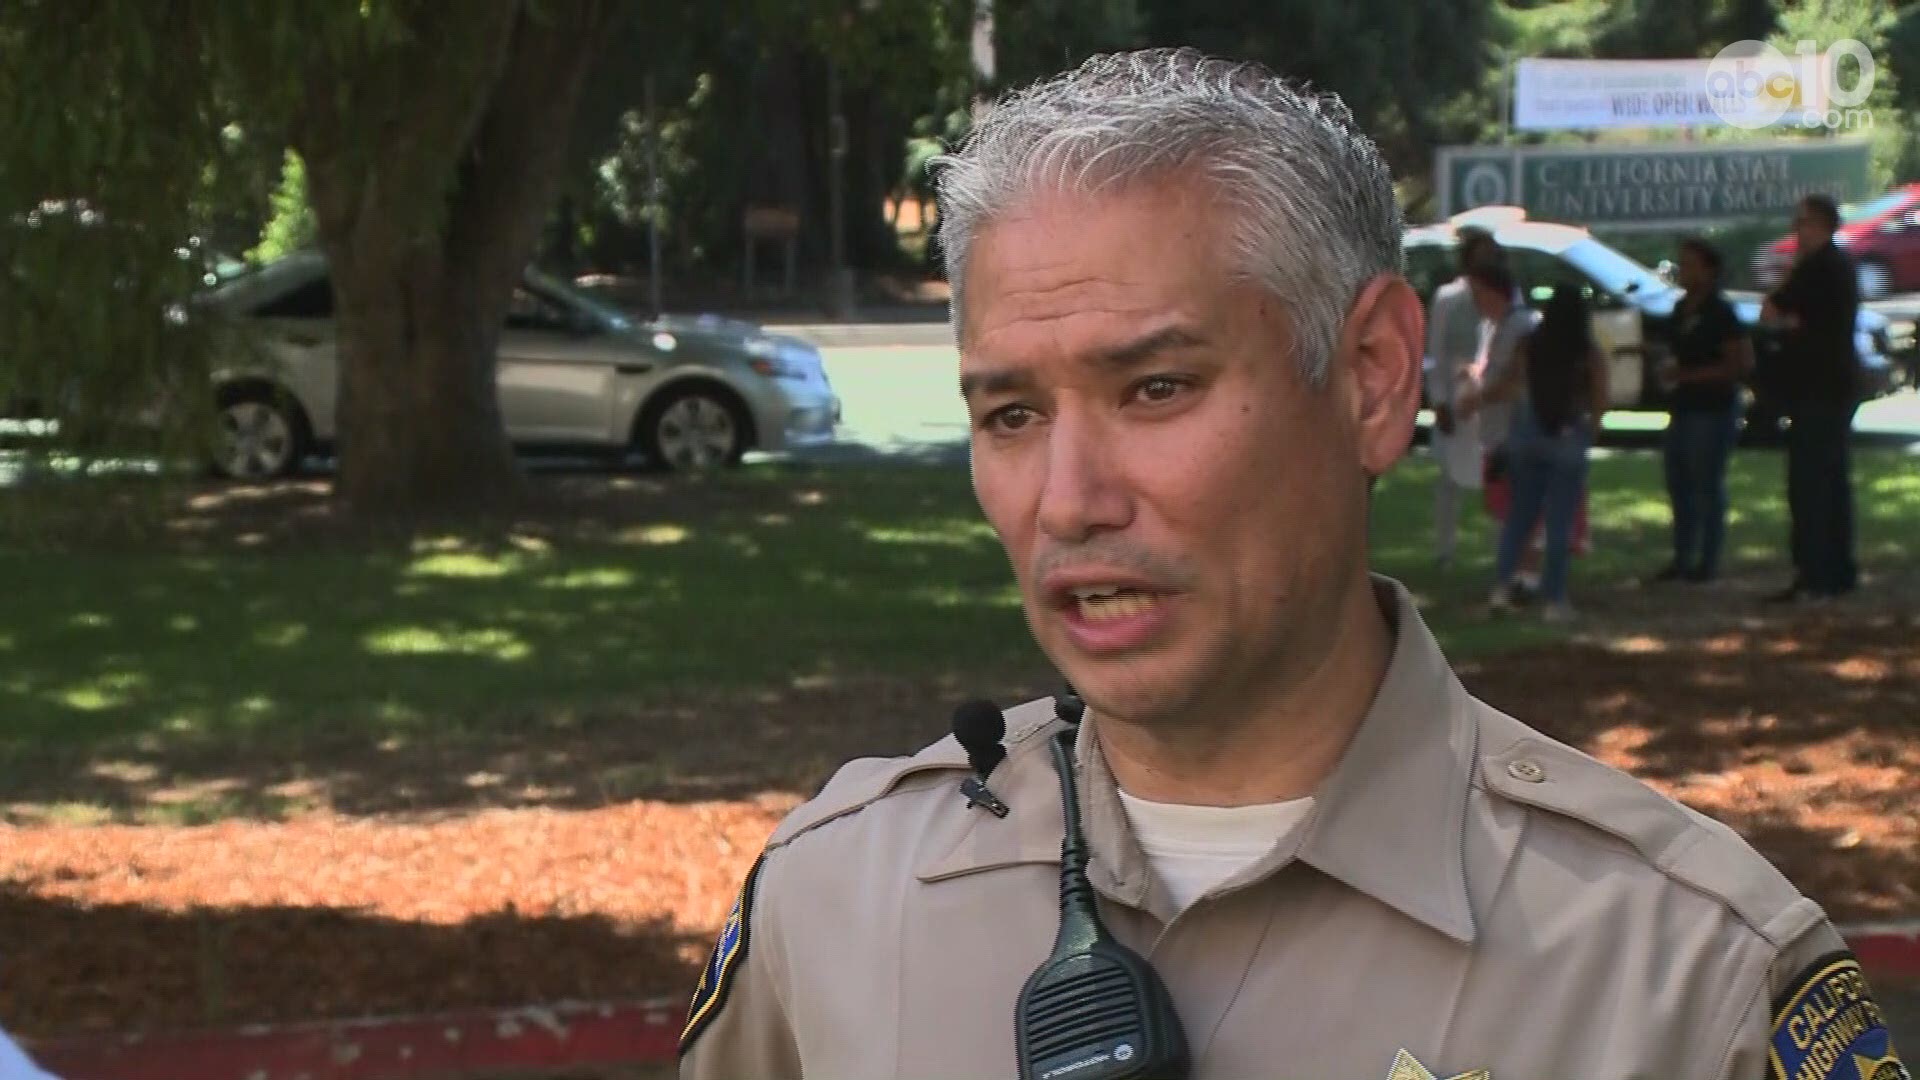 Public Information Officer Tommy Riggin of the California Highway Patrol said they have one person in custody. The suspect is said to have stolen a CHP vehicle and used it to steal a Delta College bus with people inside.